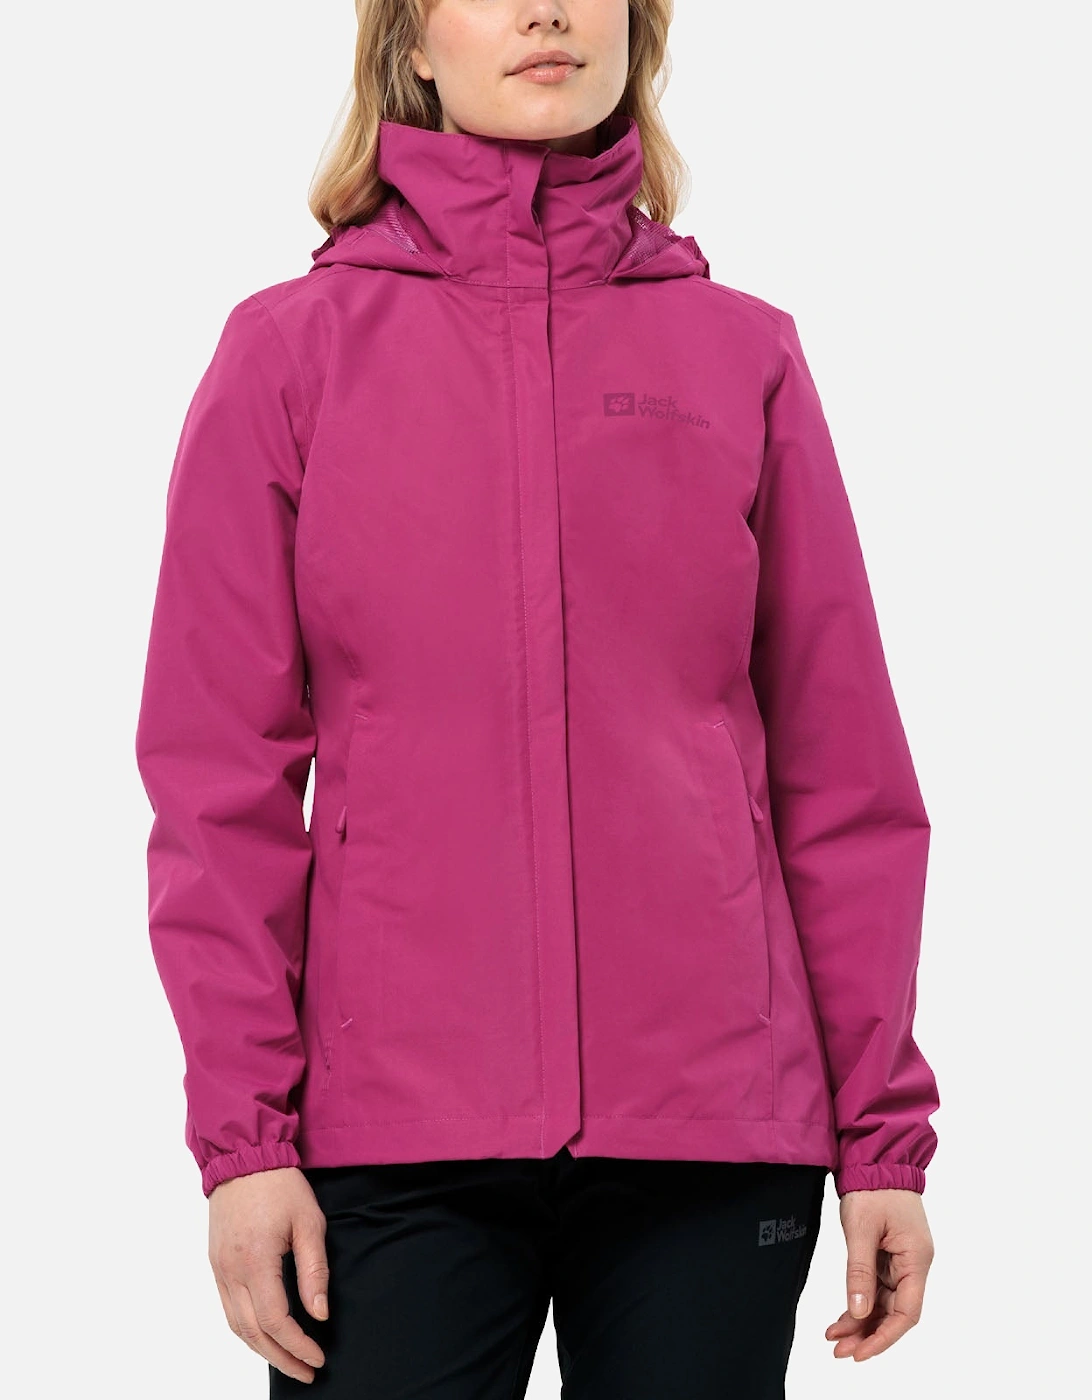 Womens Stormy Point Waterproof Shell Jacket, 37 of 36